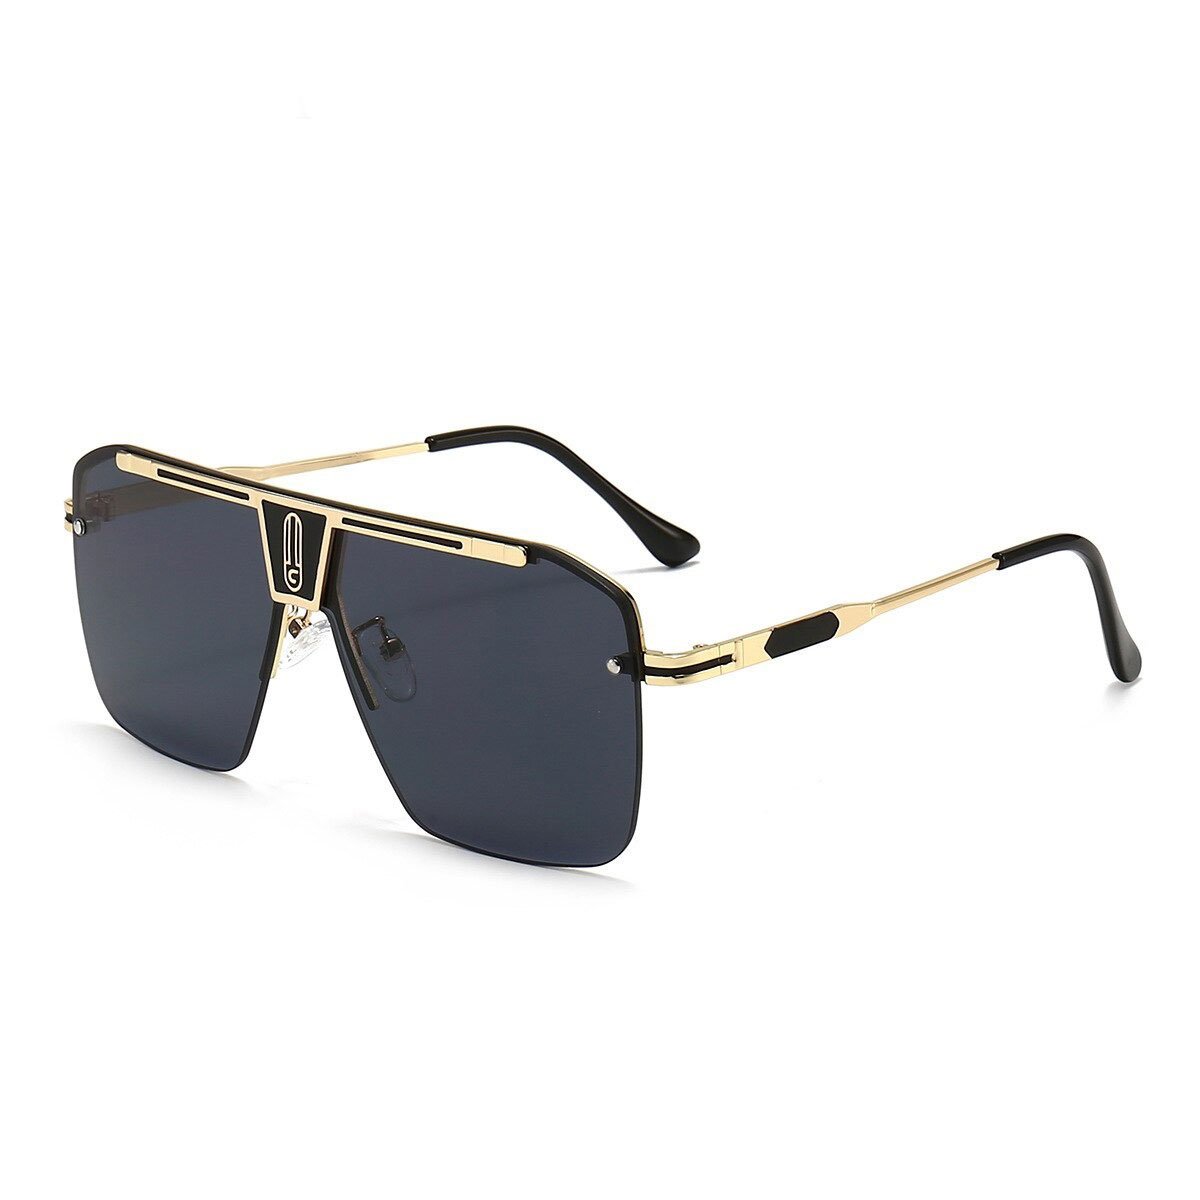 New Classic Square Metal Frame Sunglasses For Unisex-Unique and Classy